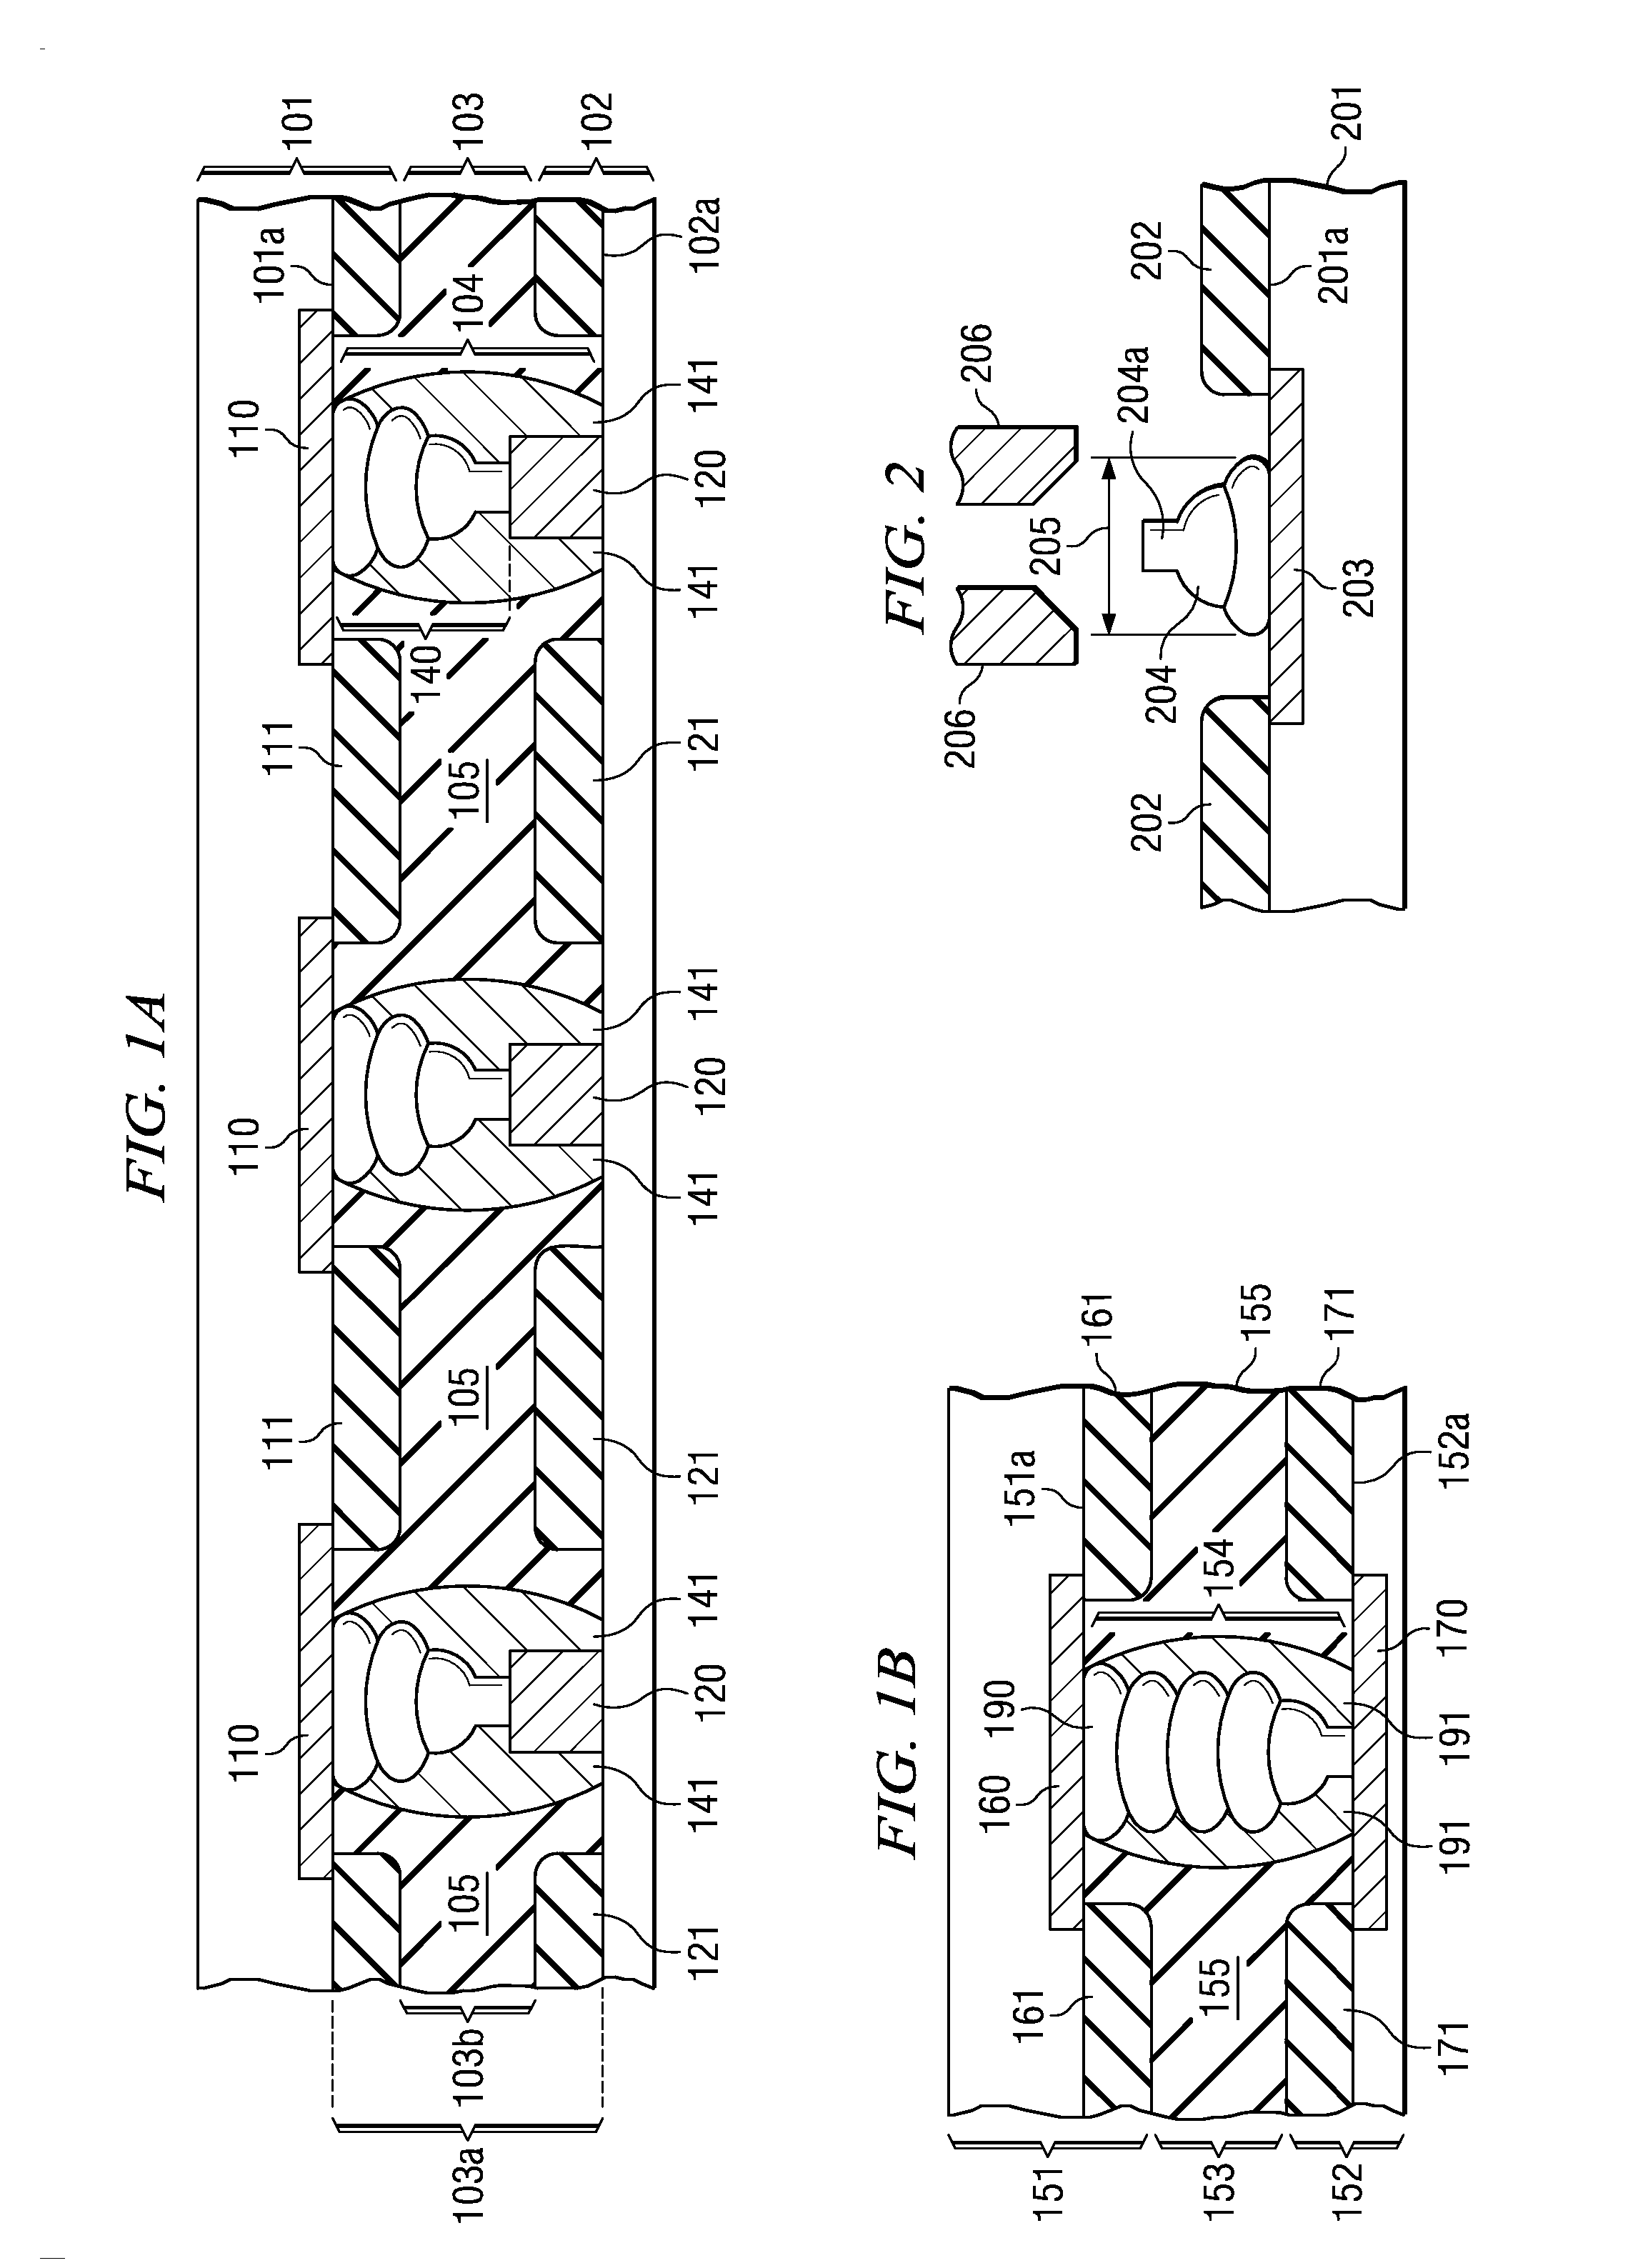 Flip-Chip Device Having Underfill in Controlled Gap